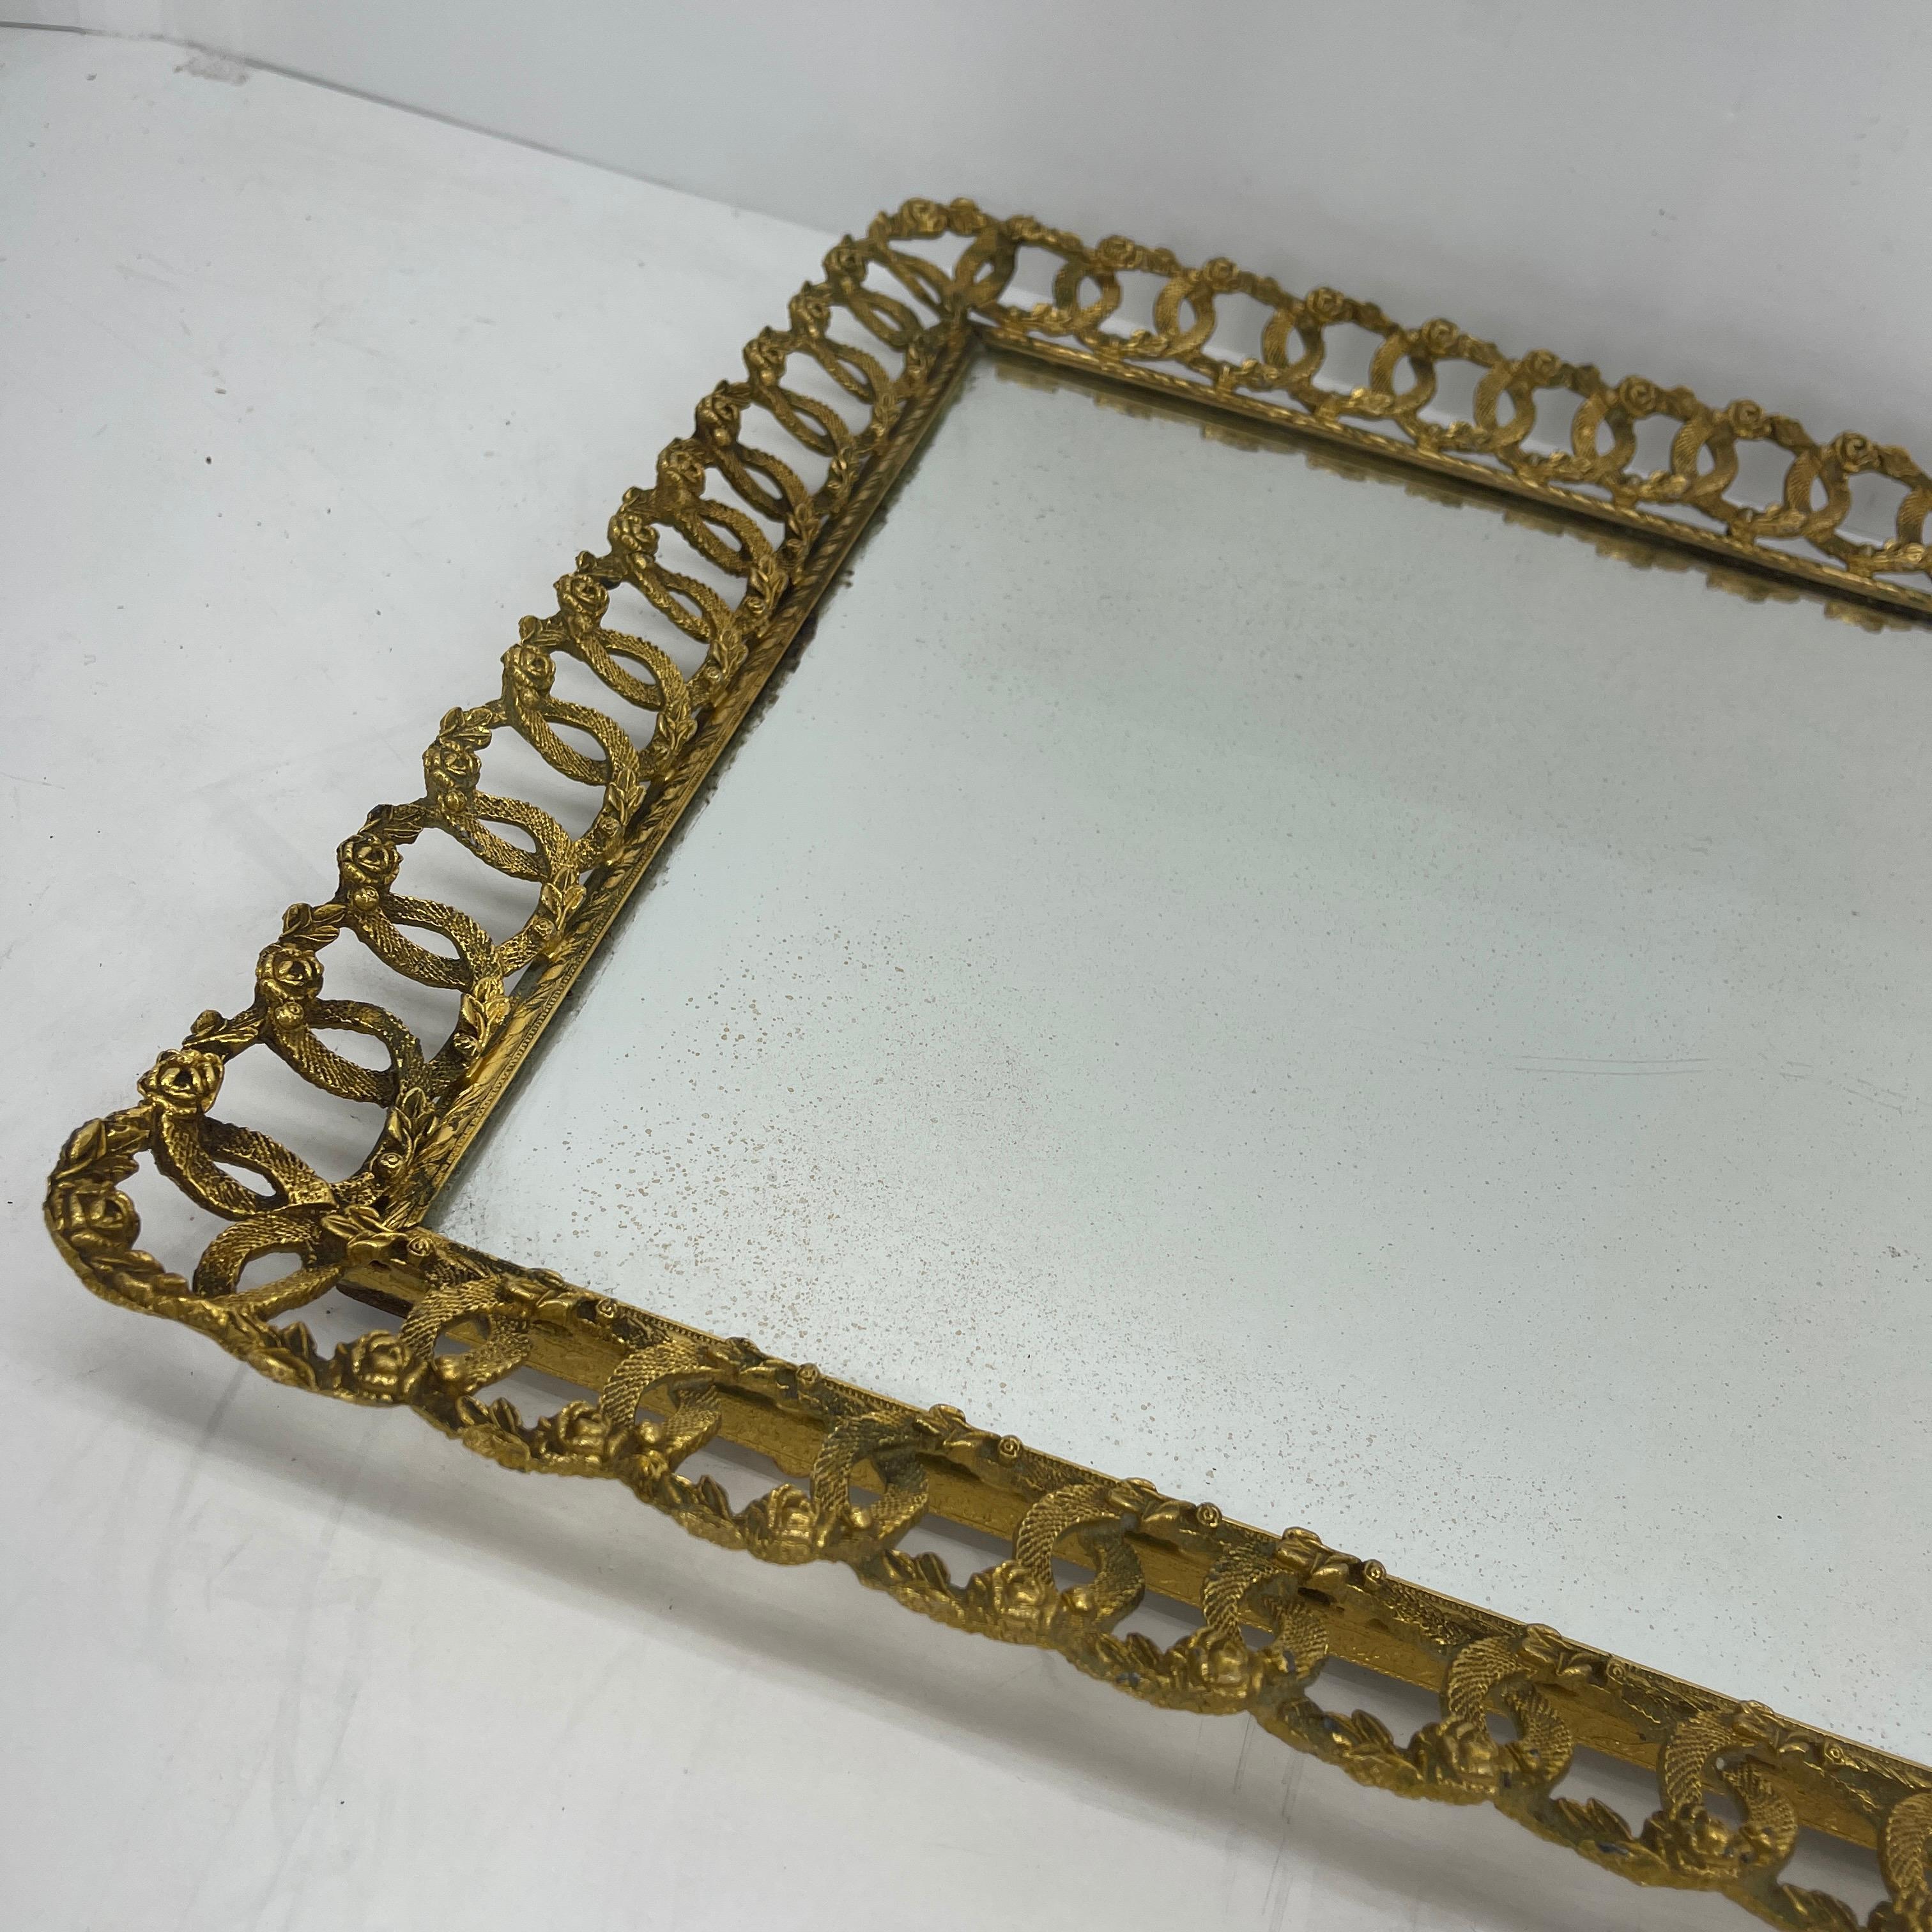 20th Century Hollywood Regency Gilded Mirrored Serving Tray with Filigree Design